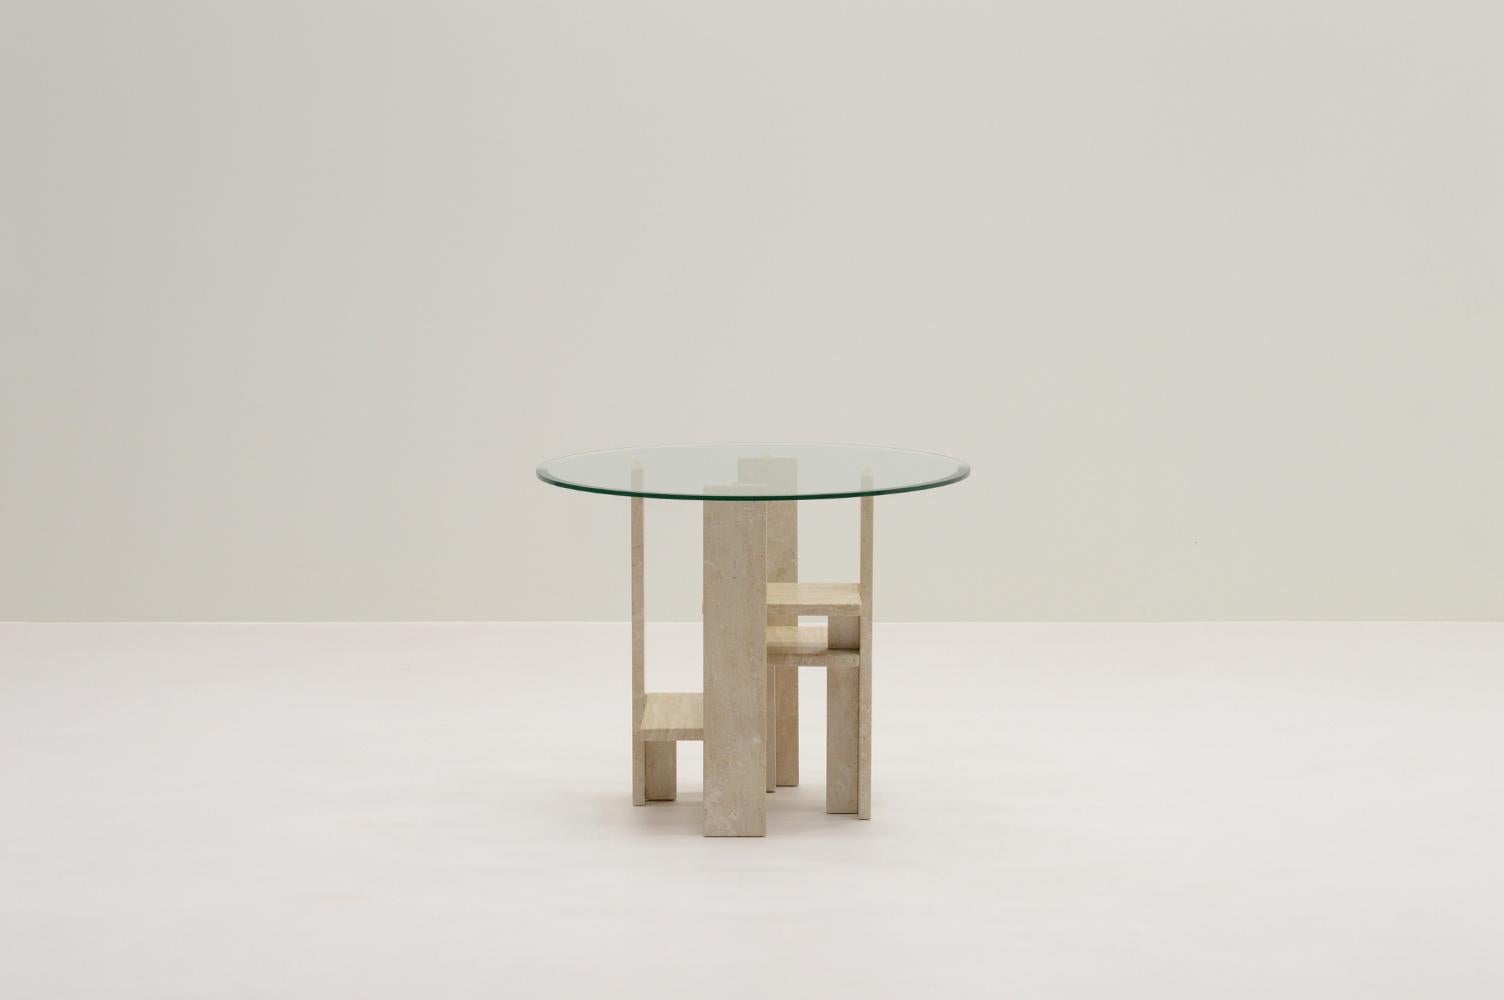 Travertine side table by Willy Ballez, 1970s Belgium. This sculptural side table was manufactured in his own atelier in Belgium. Multiple slabs of solid travertine make a beautiful base. Still with its original round glass beveled top. The table is